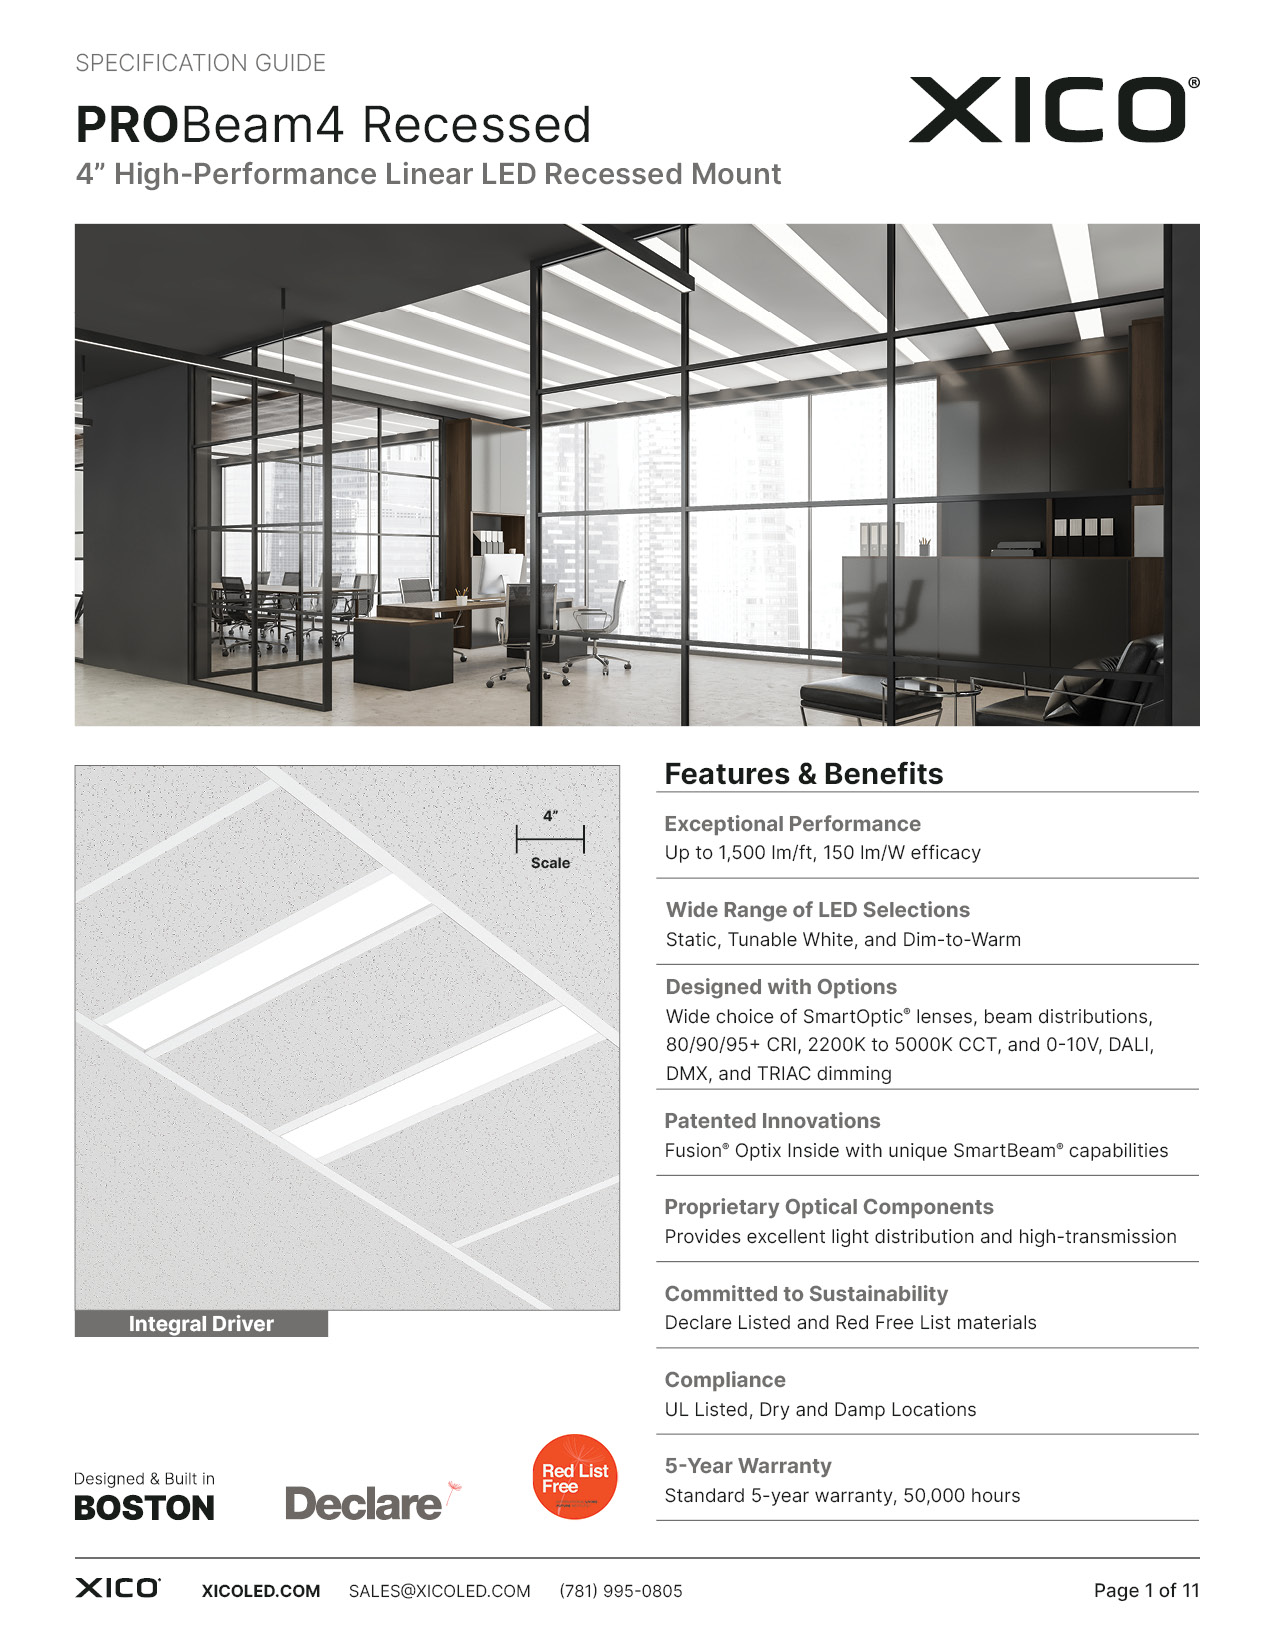 PROBeam4 Recessed Specification Guide